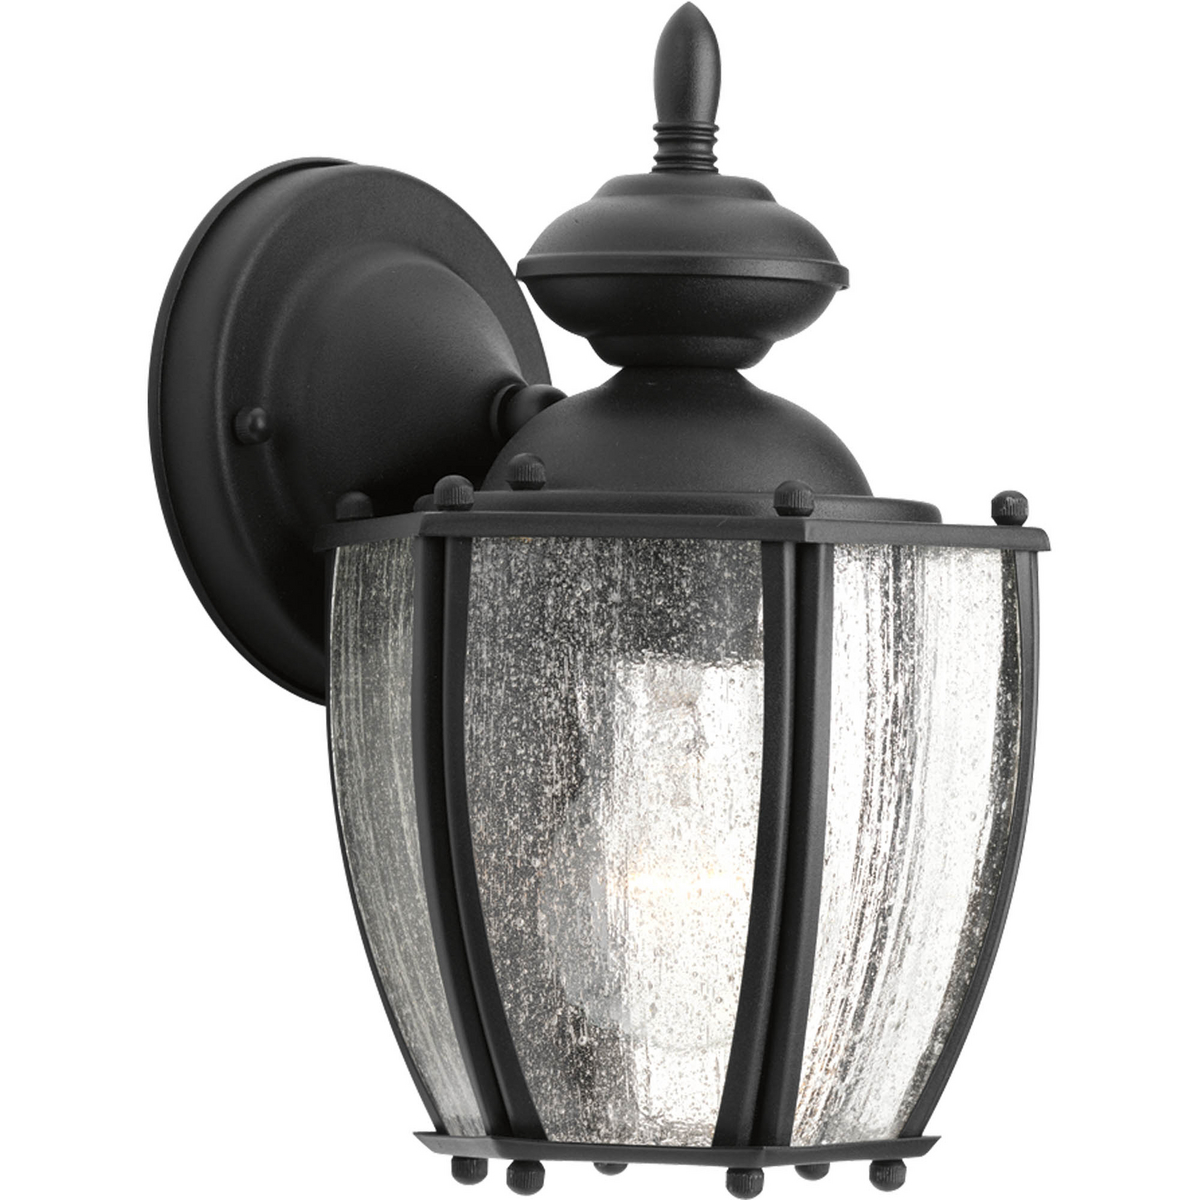 Solid one-light 6 in small wall lantern in rich weathered finish is complemented by seeded glass panels - a great choice for low maintenance and years of enjoyment. Black finish.